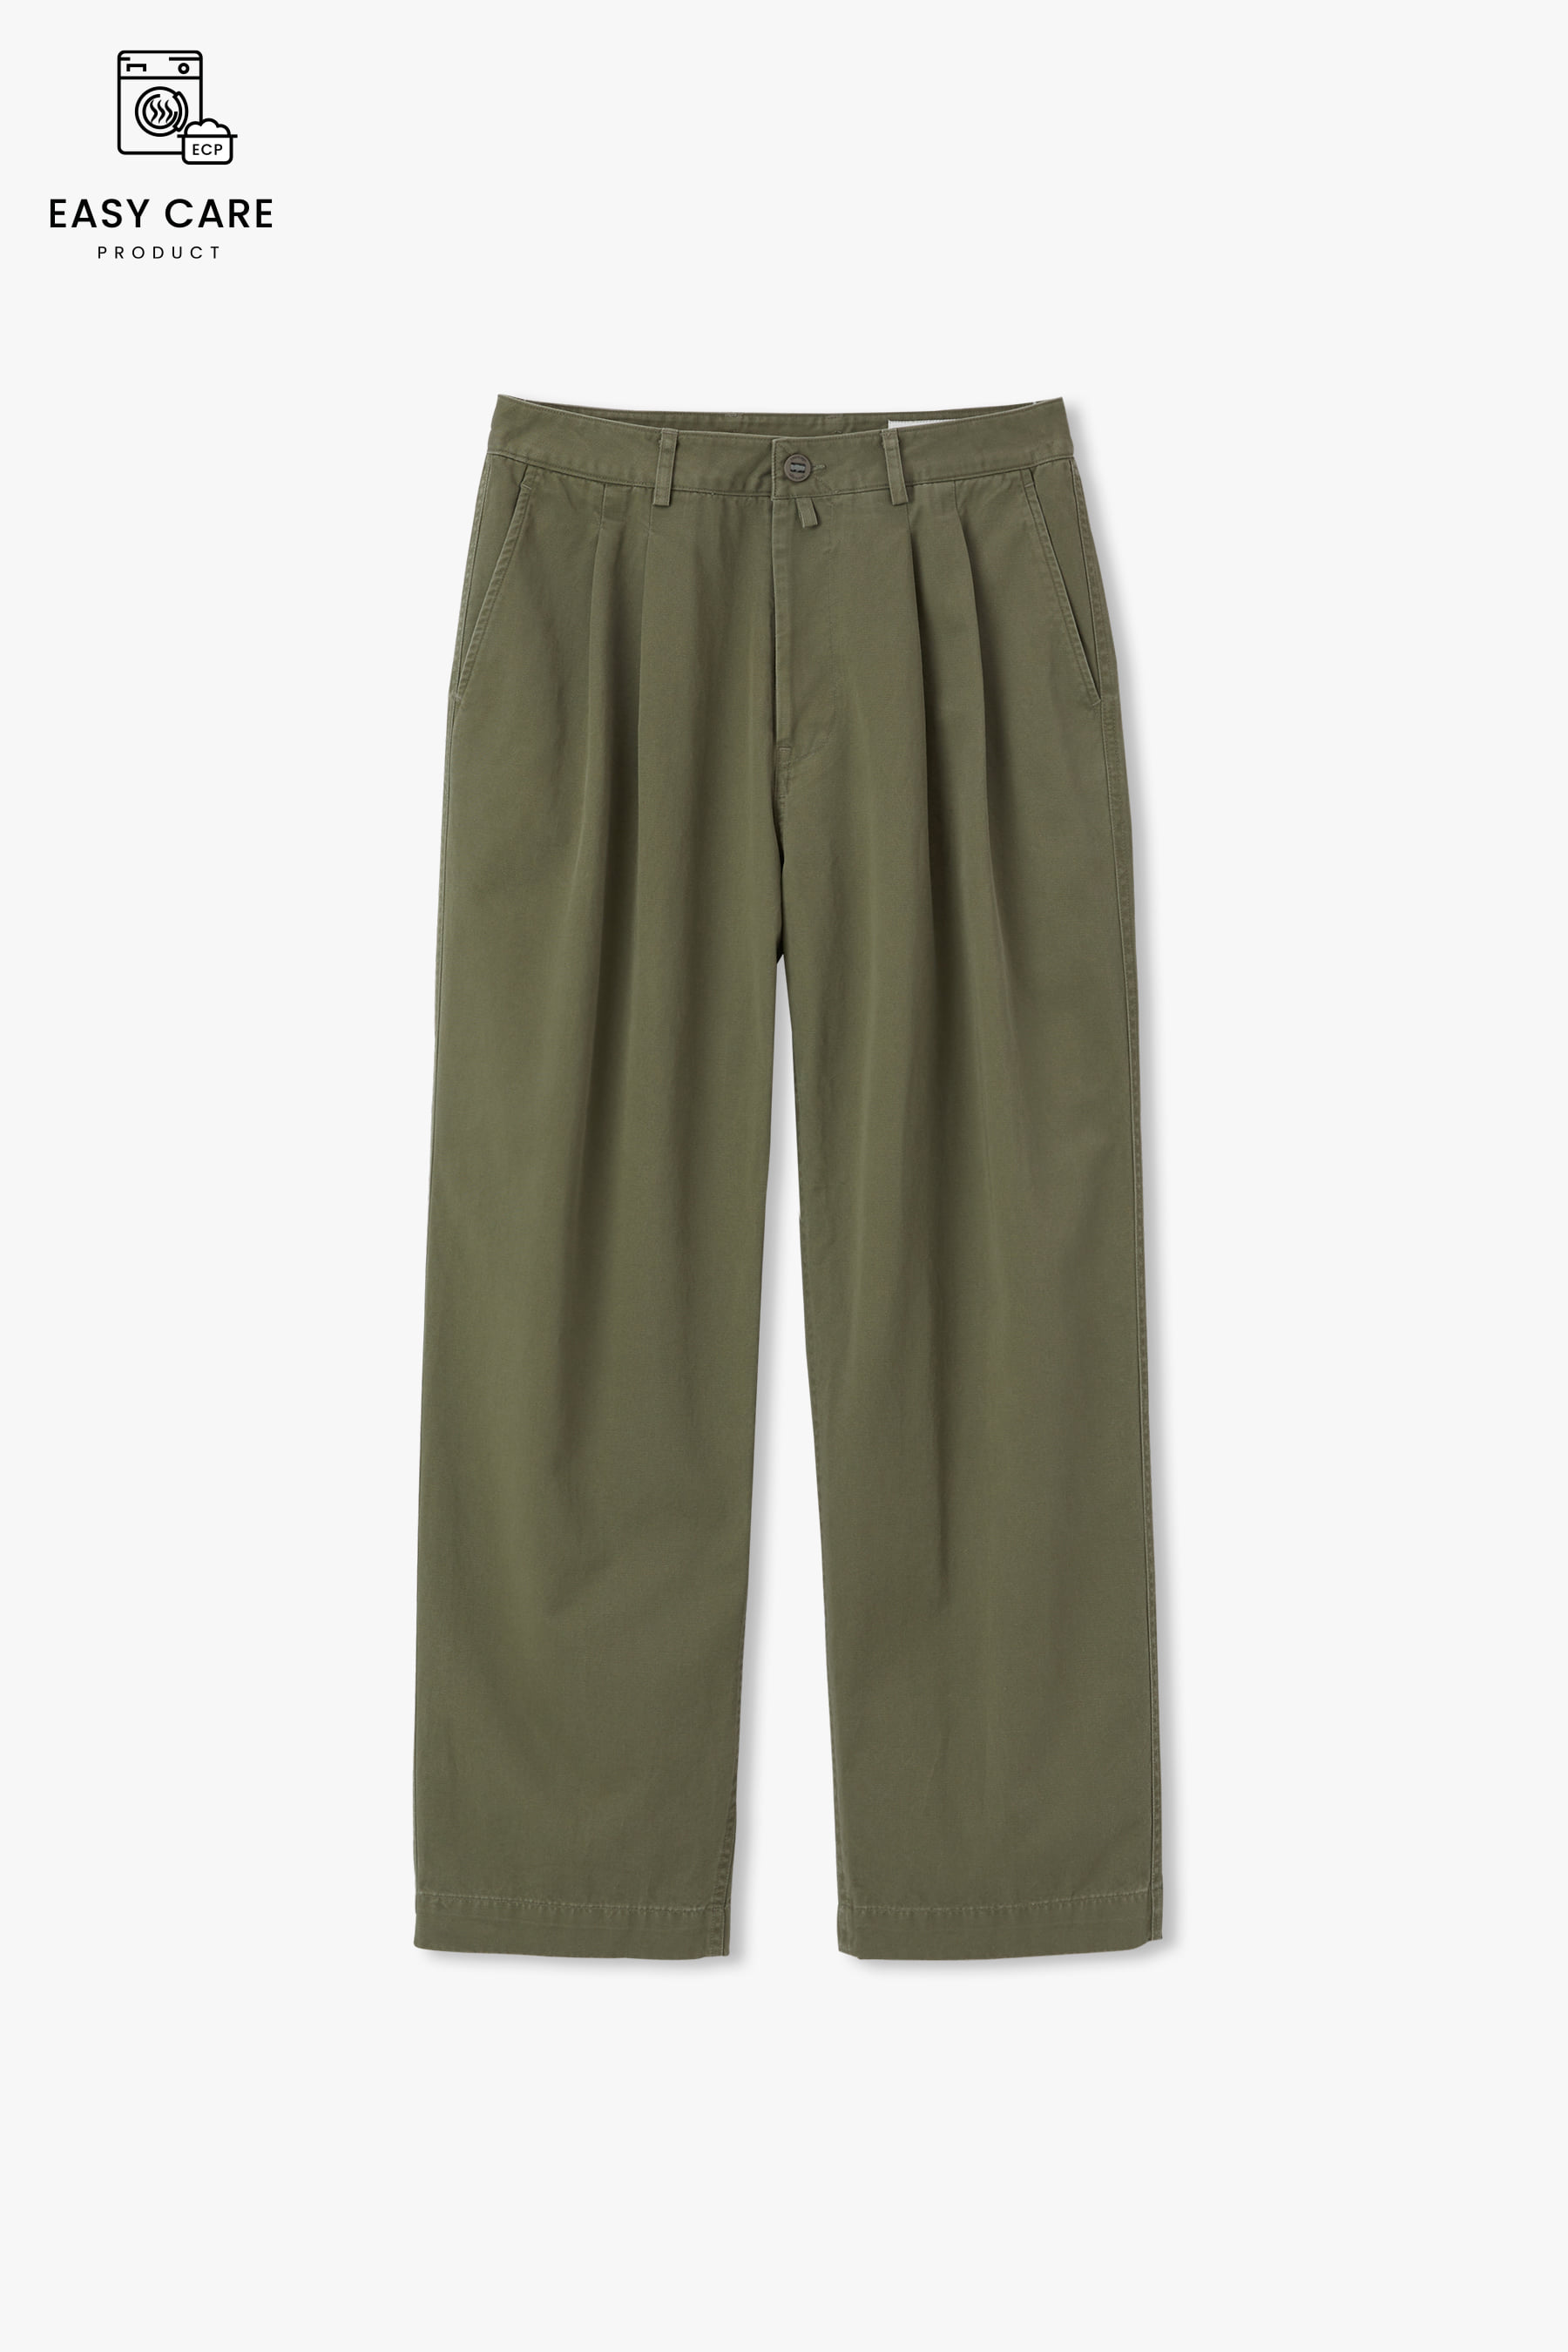 MOSS GREEN YRS Y-550 WASHED WIDE CHINO PANTS (ECP GARMENT PROCESS)